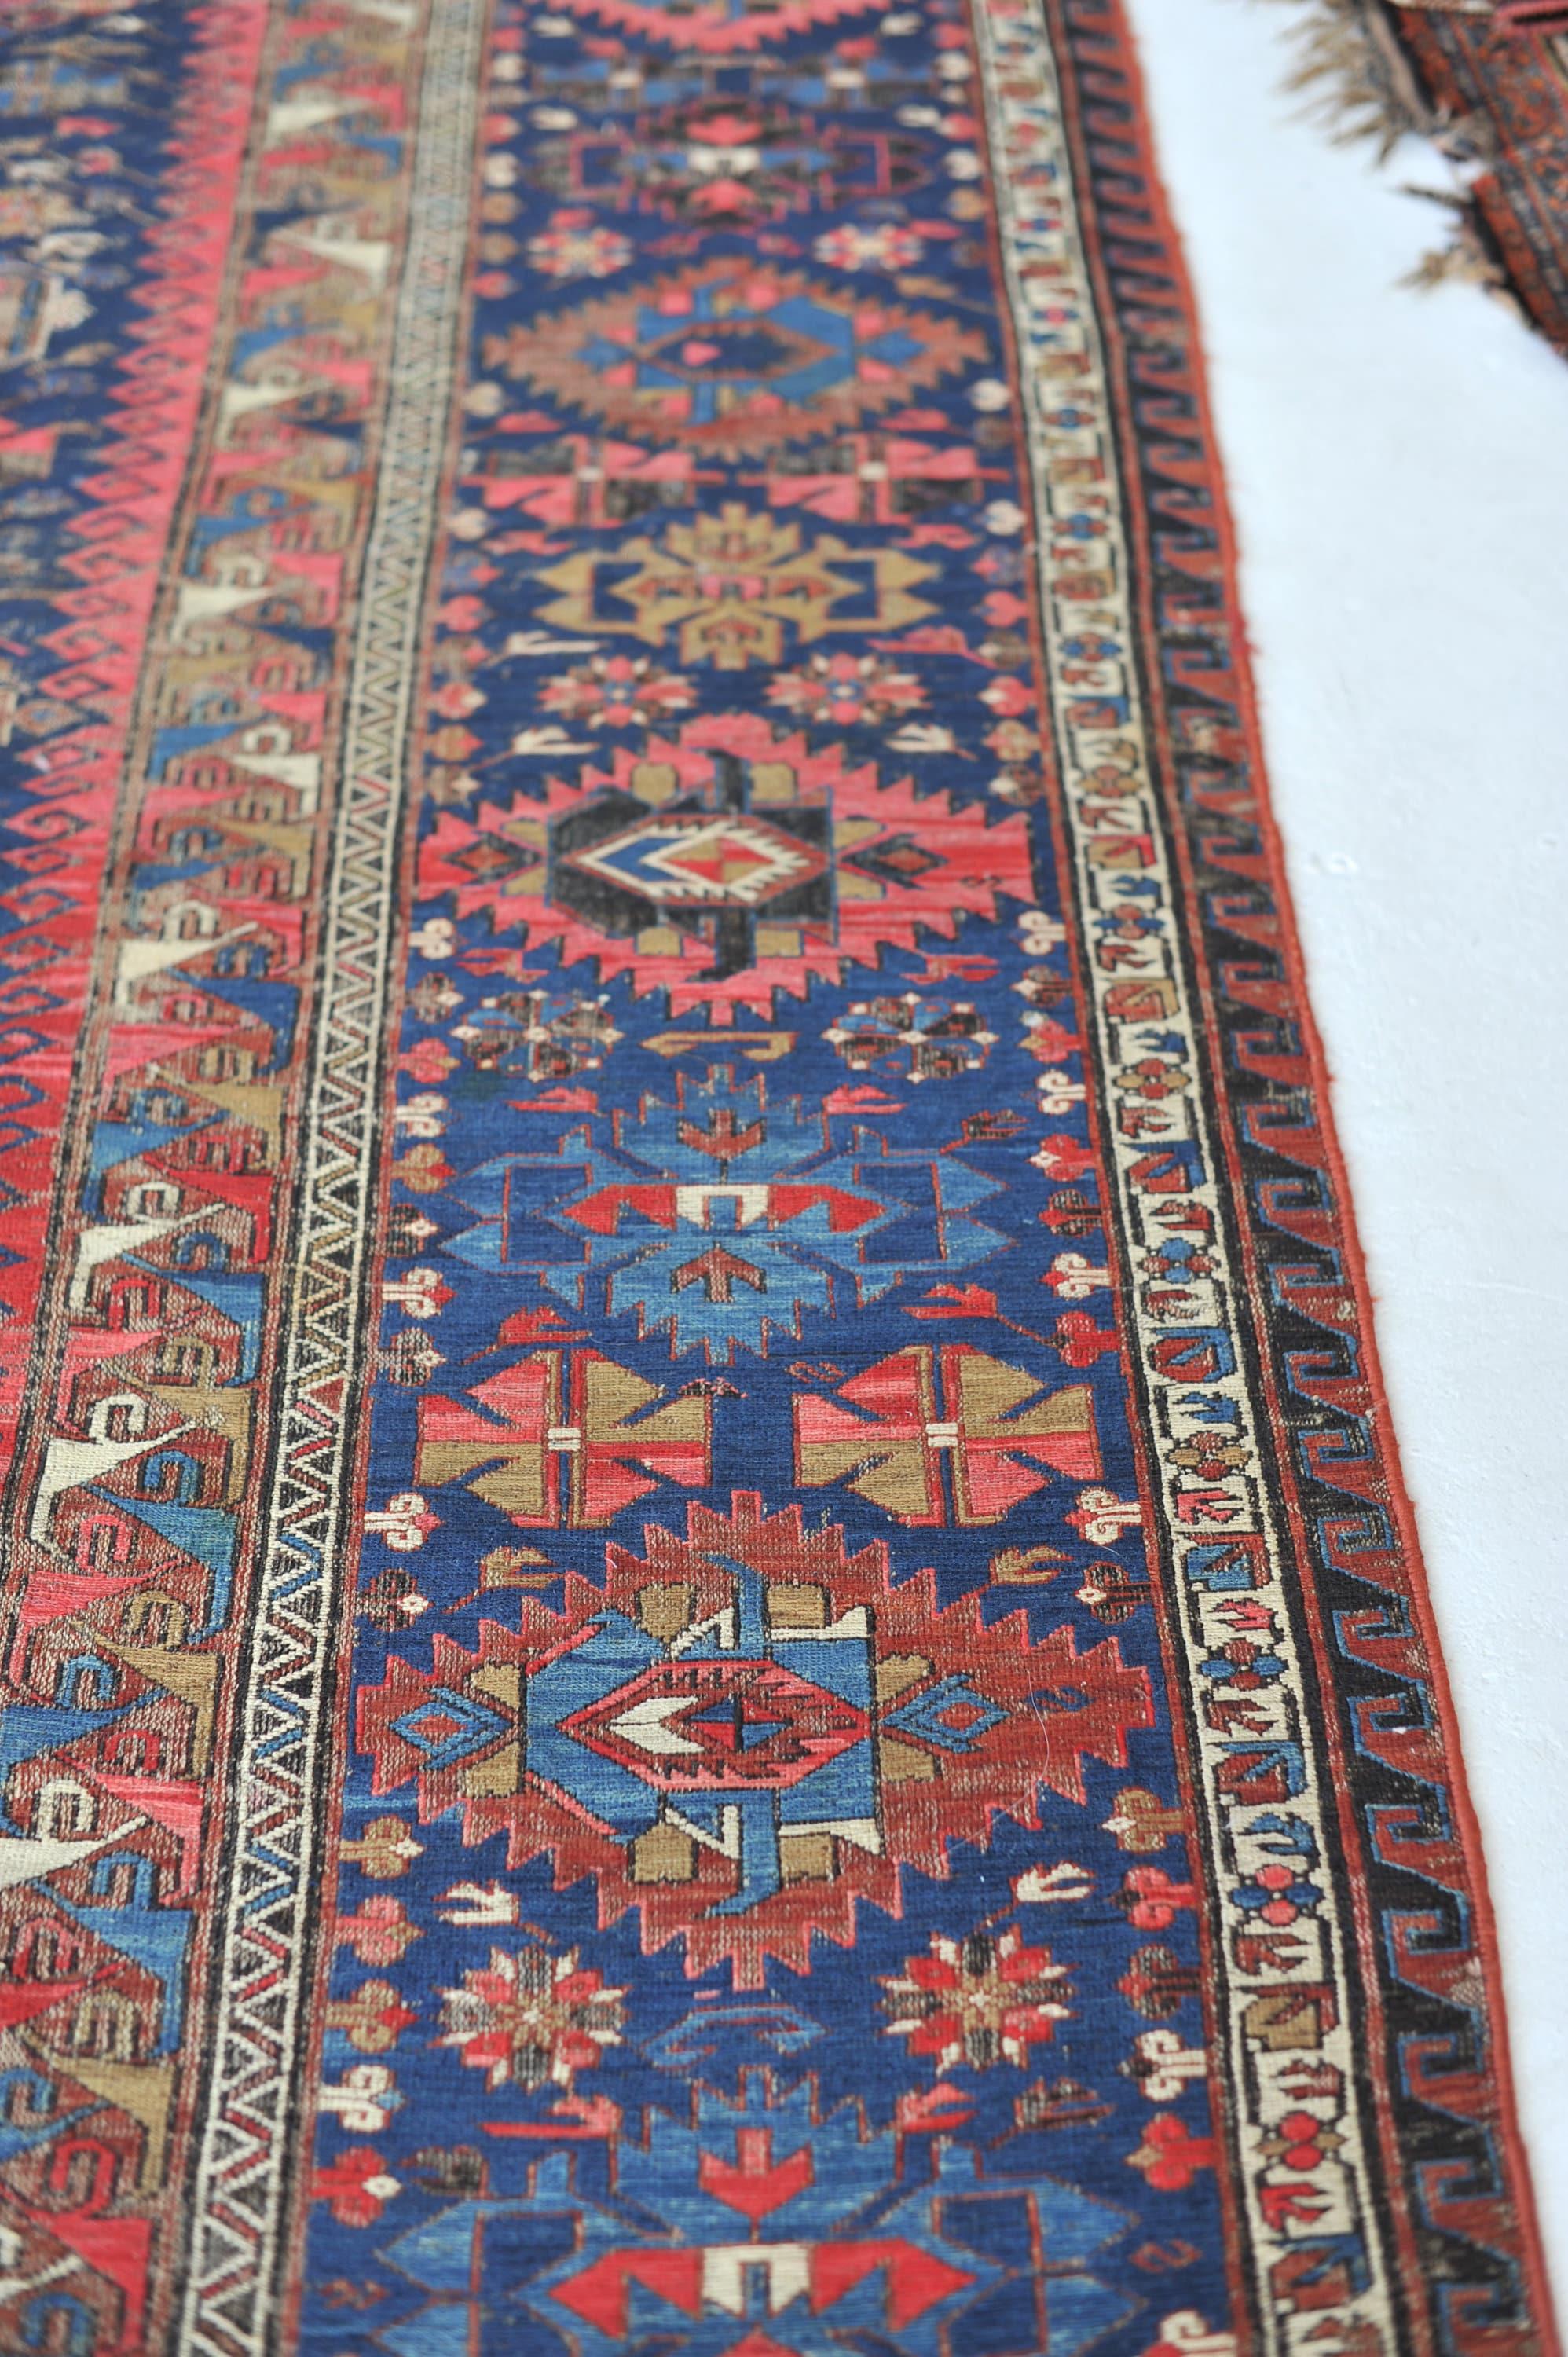 20th Century One-of-one Over-sized Palatial Antique Sumac Textile Rug, c.1910 For Sale